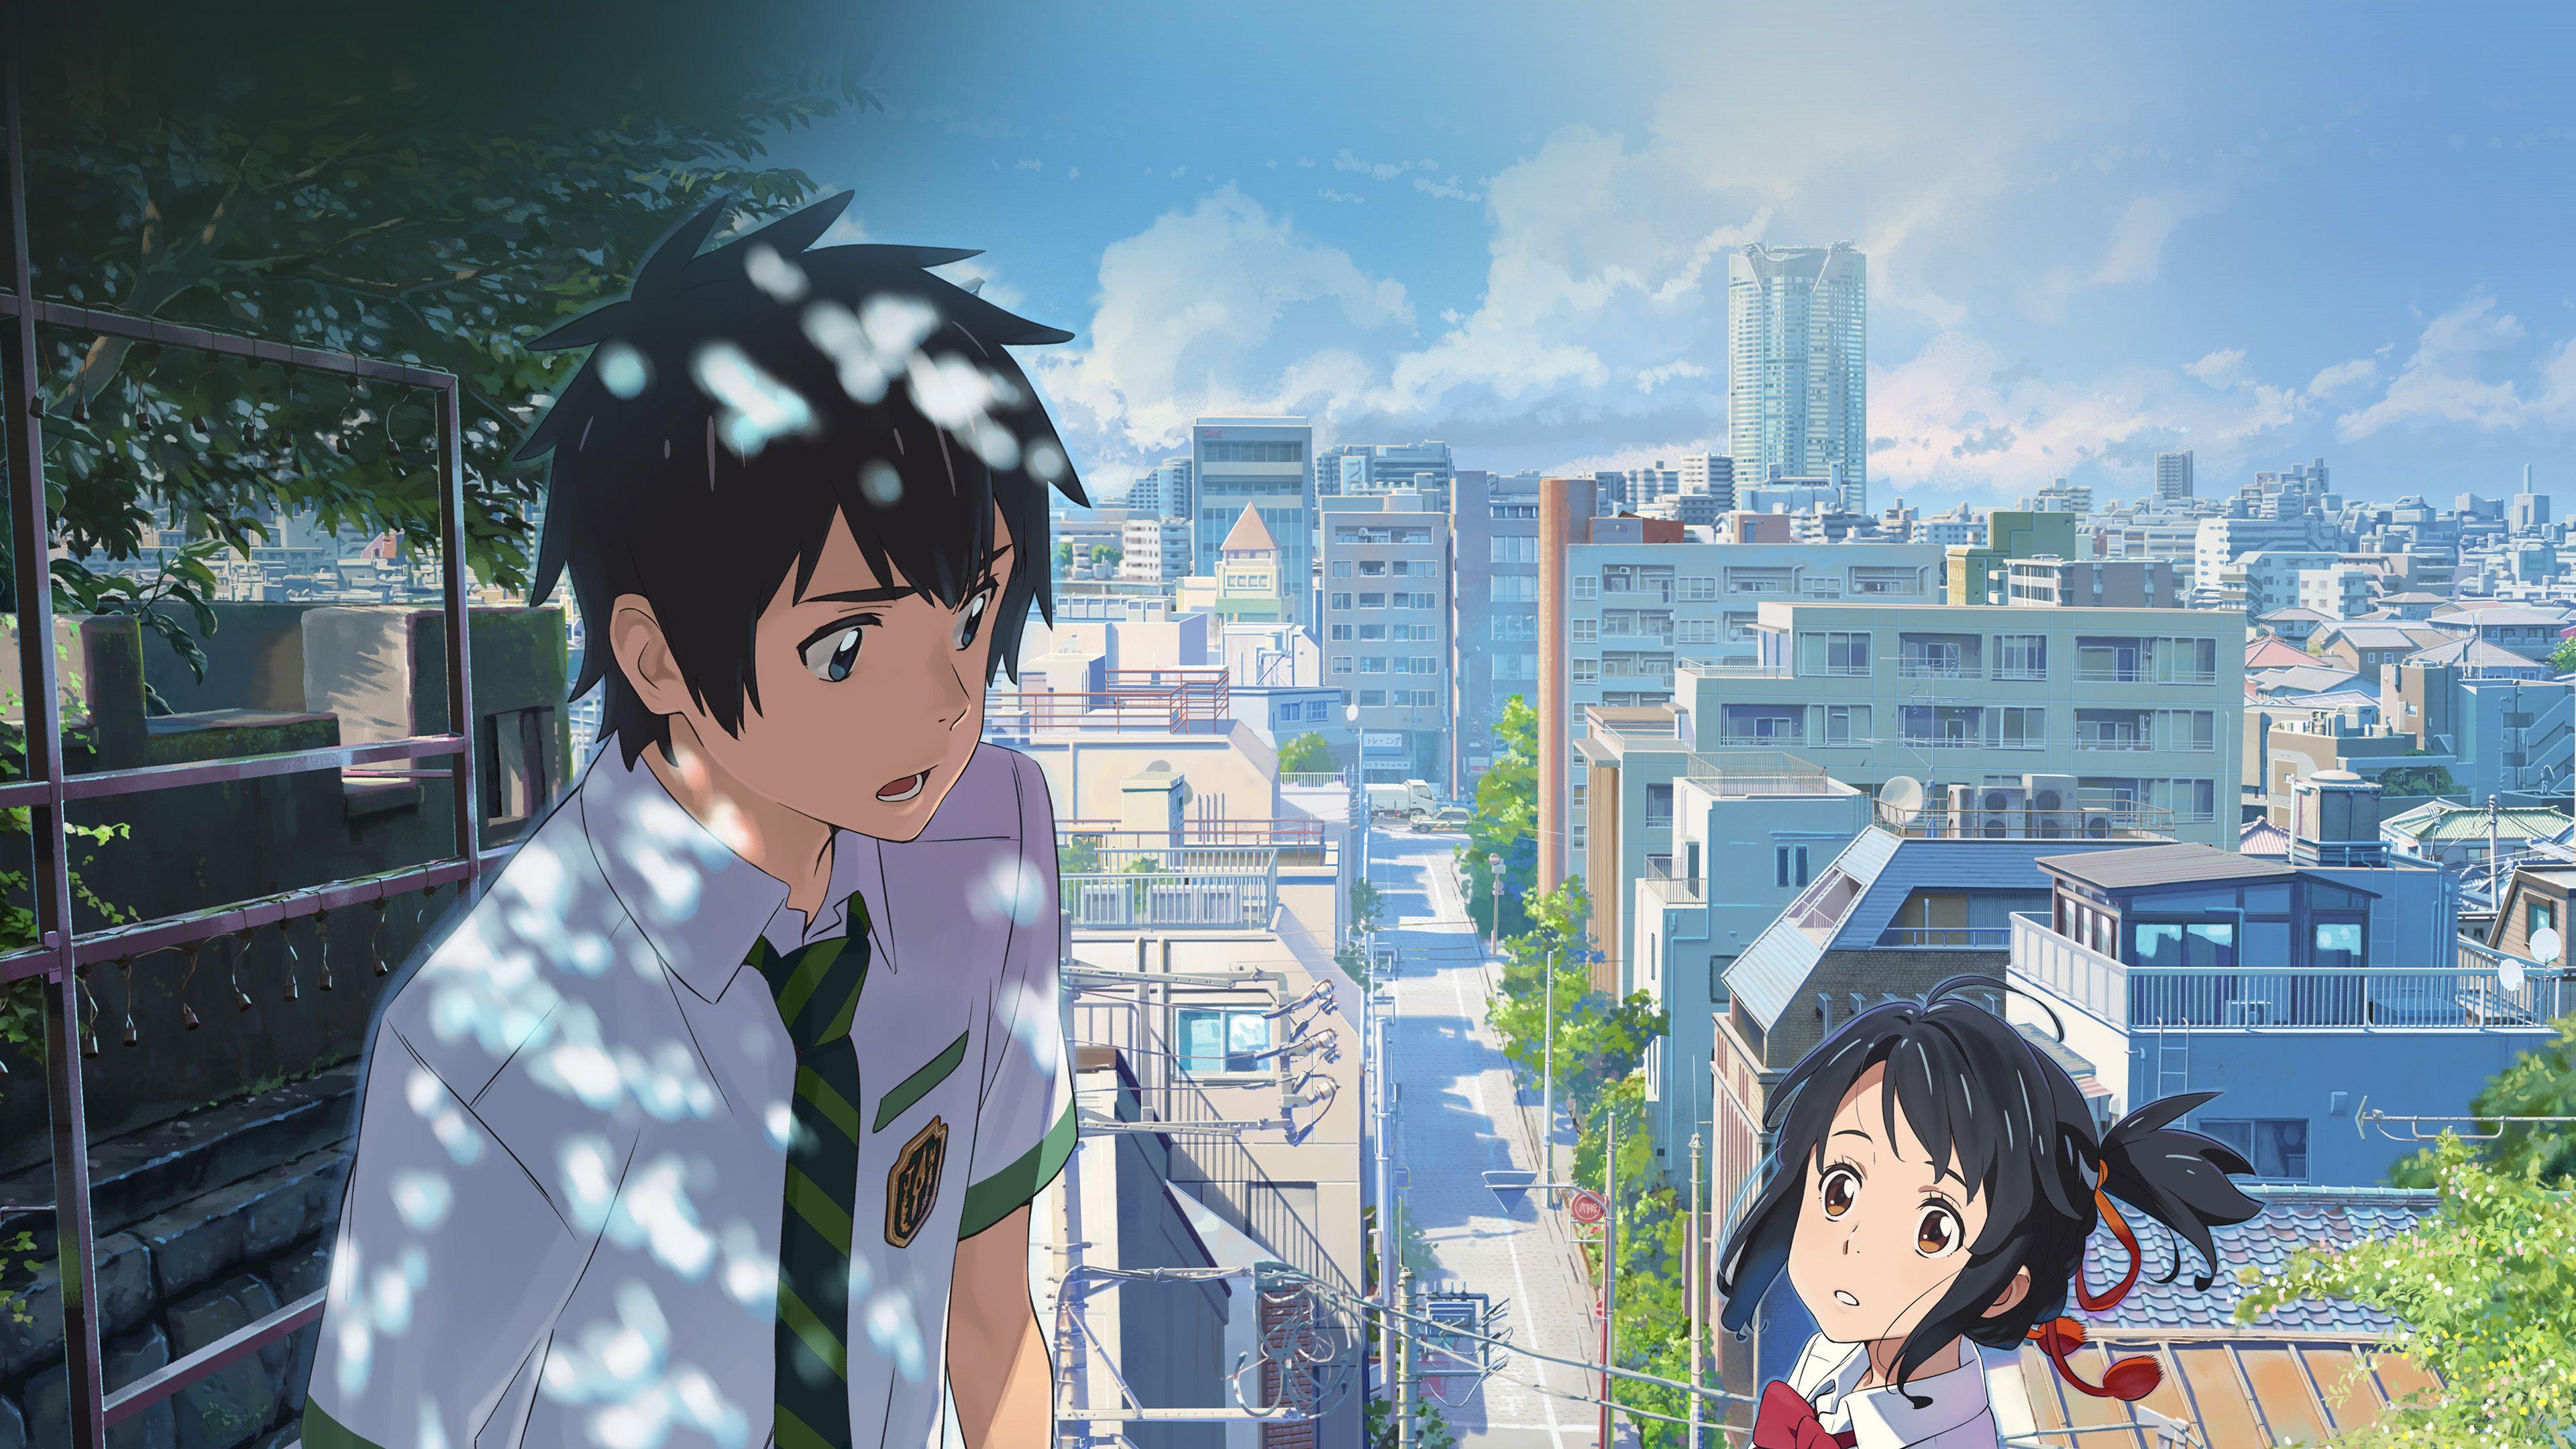 Your Name 4K Wallpapers - Top Free Your Name 4K Backgrounds ...